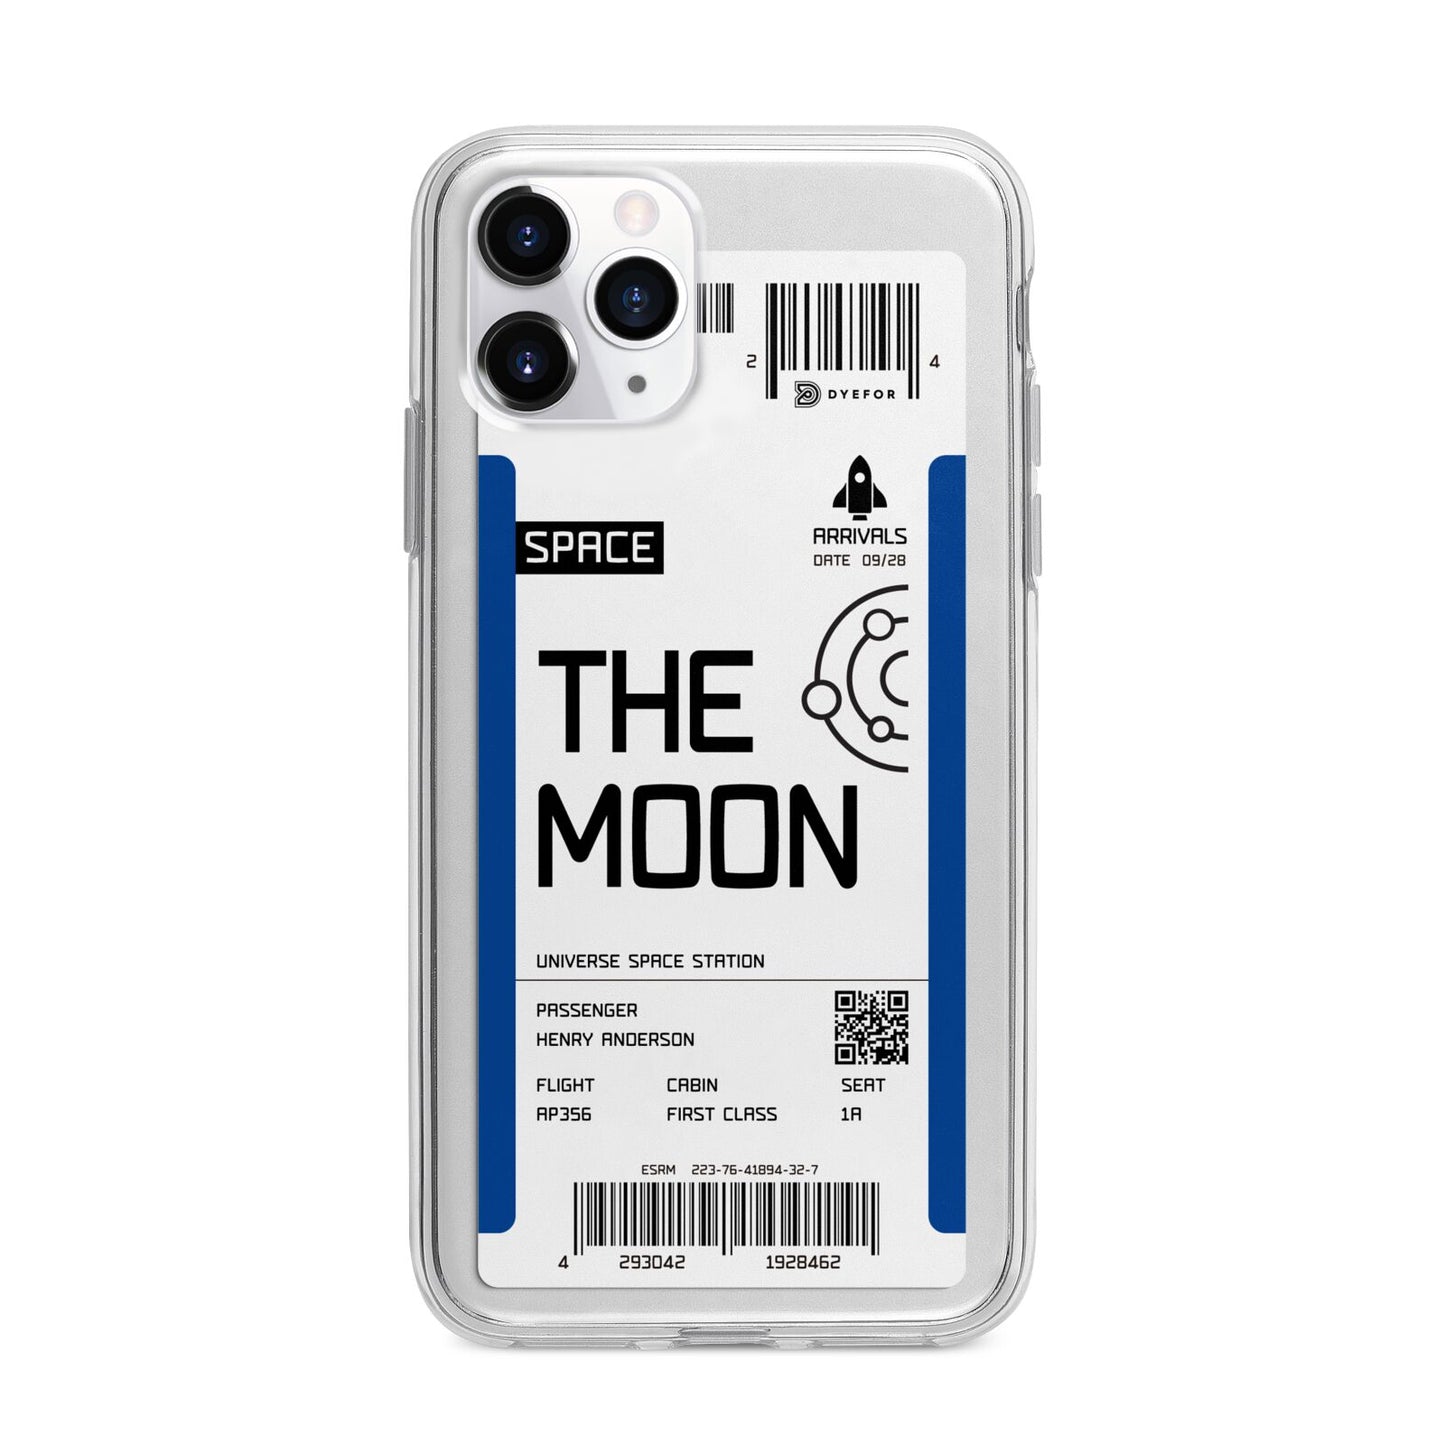 The Moon Boarding Pass Apple iPhone 11 Pro Max in Silver with Bumper Case